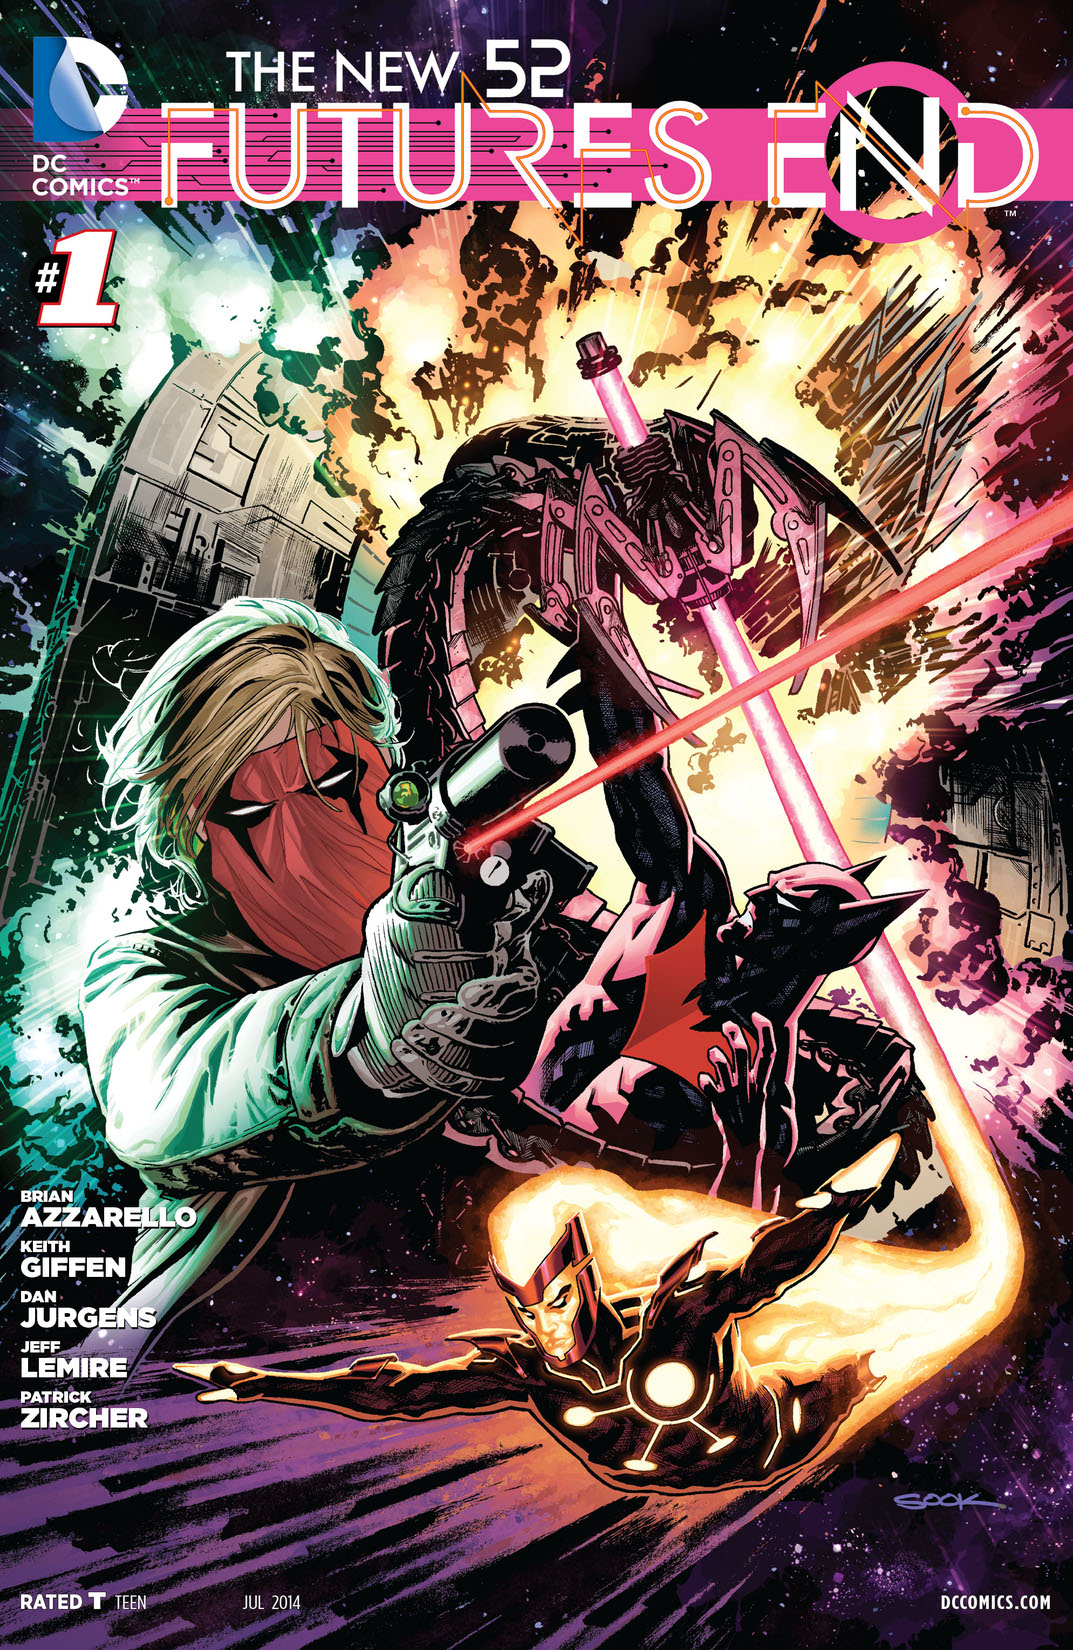 The New 52: Futures End #1 preview images